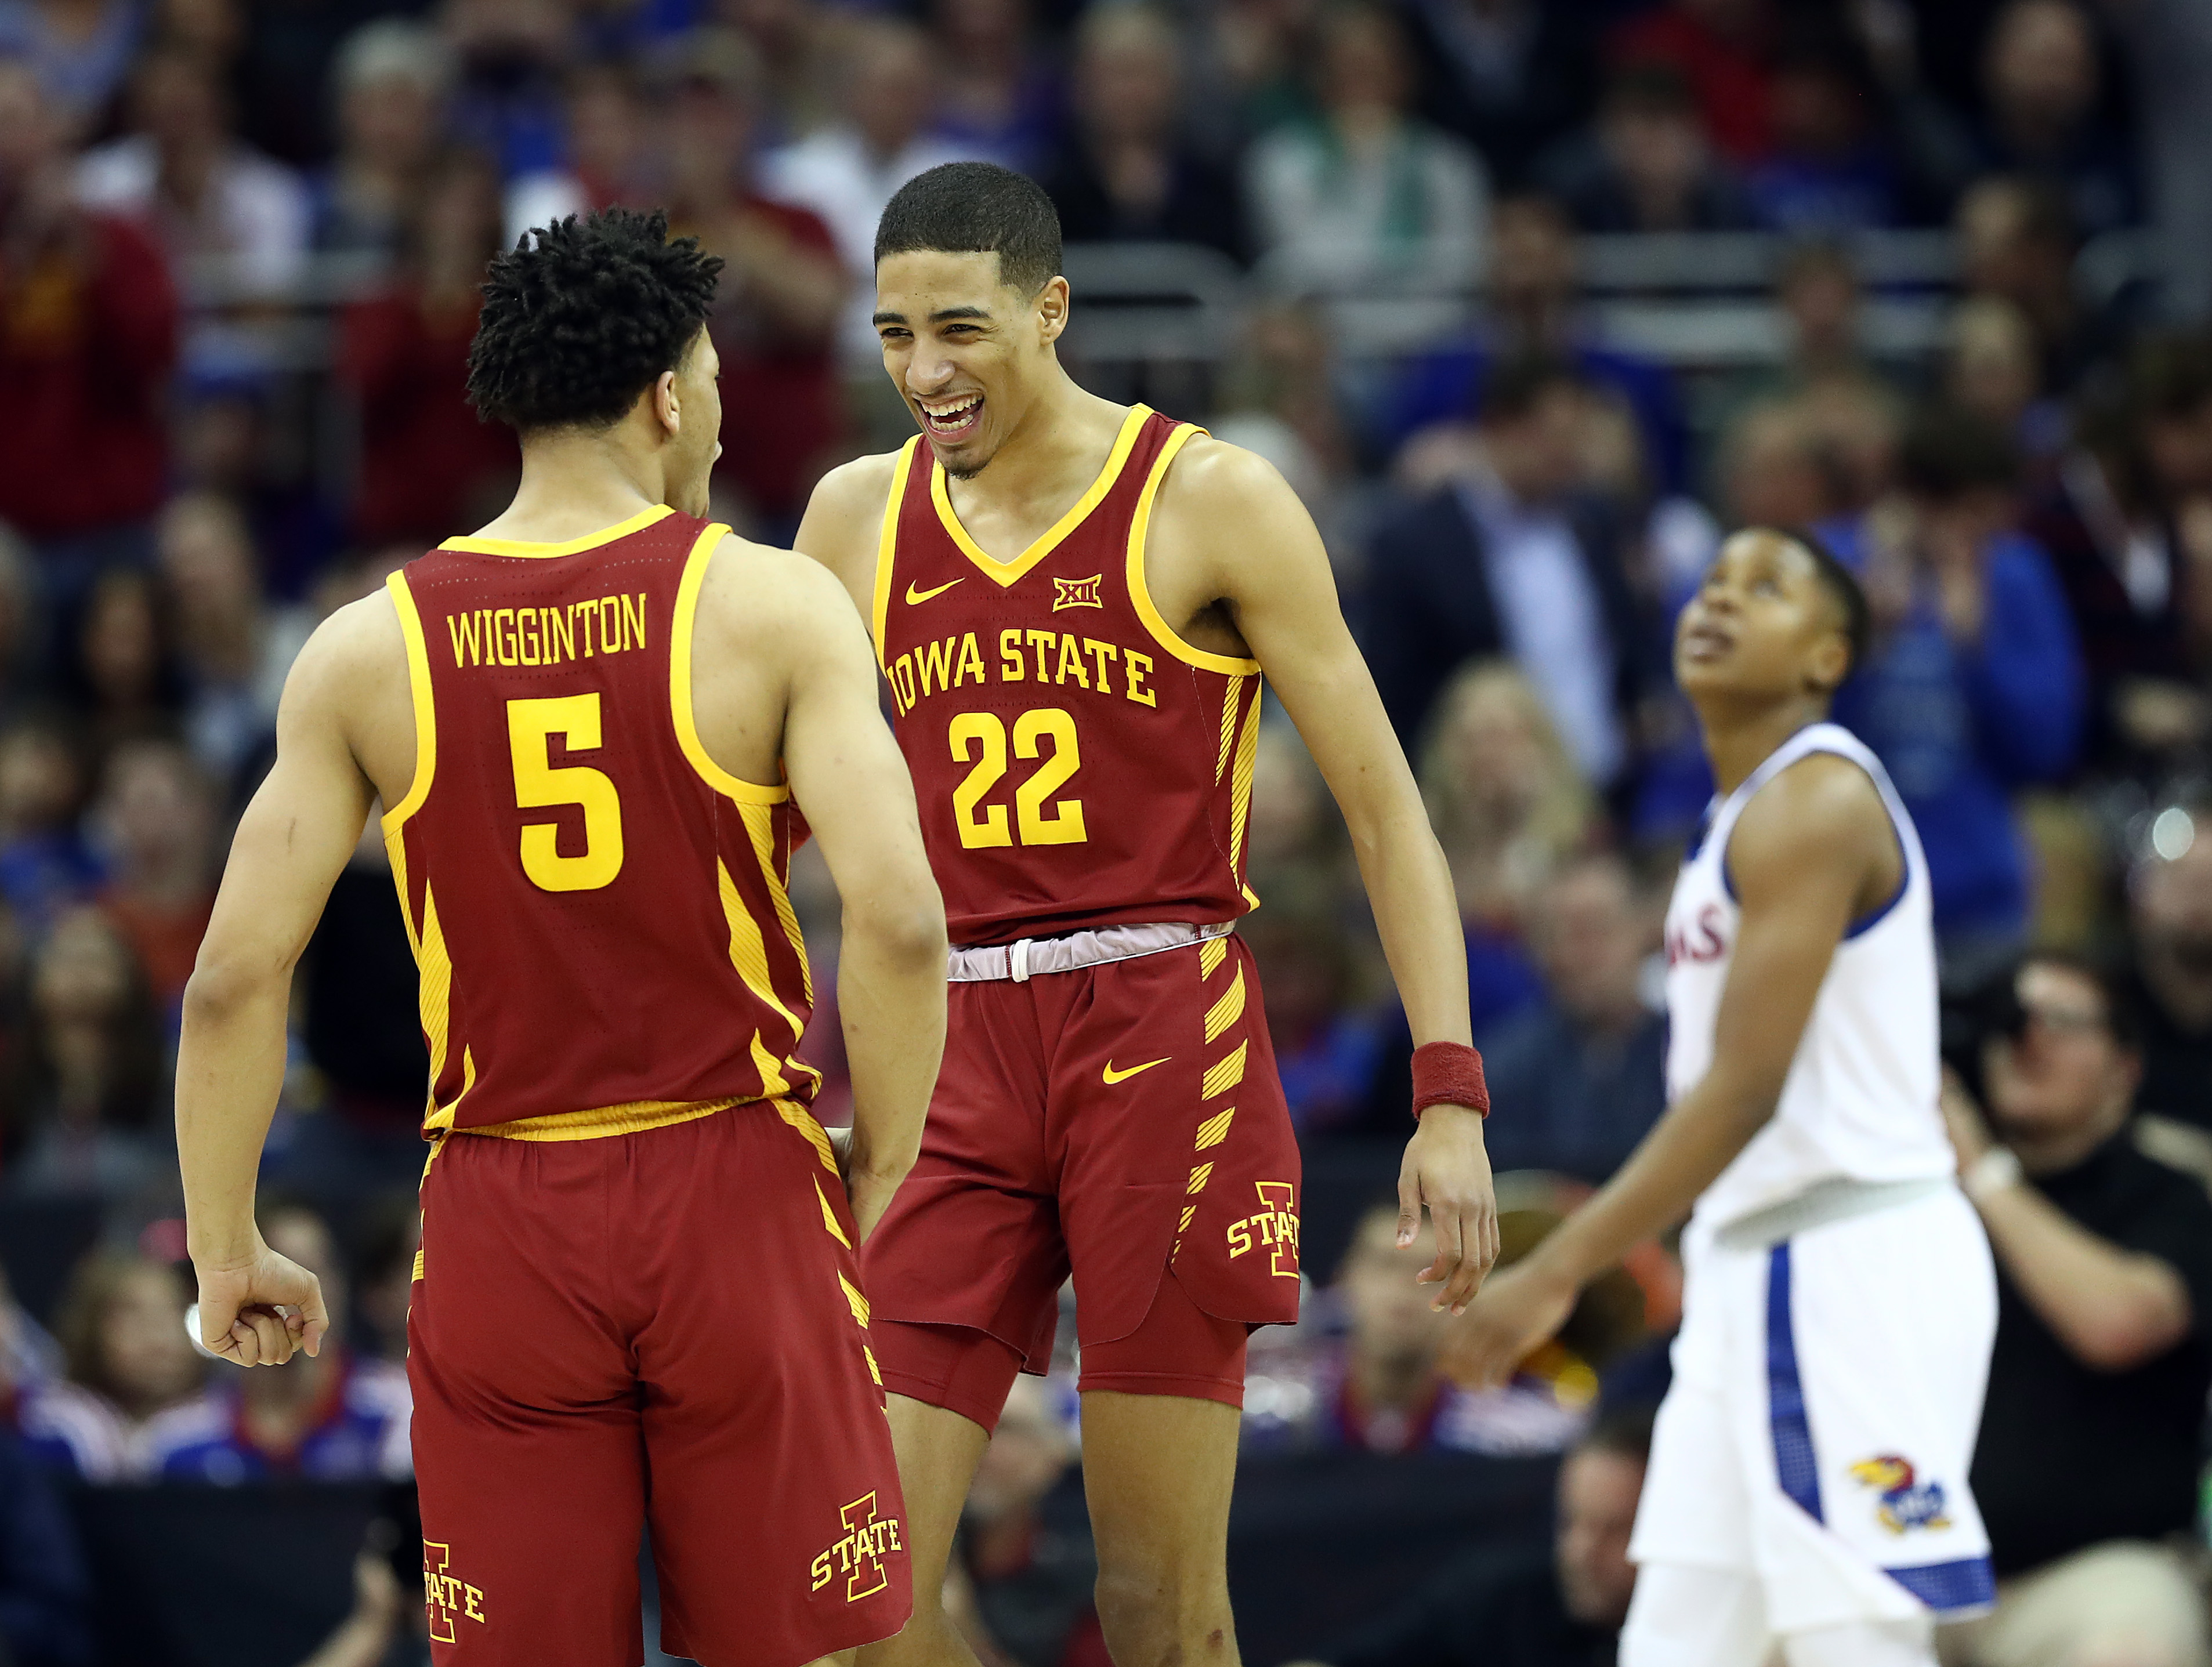 Tyrese Haliburton #22 and Lindell Wigginton #5 of the Iowa State Cyclones celebrate as the Cyclones defeat the Kansas Jayhawks 78-66 to win the Big 12 Basketball Tournament Finals at Sprint Center on March 16, 2019 in Kansas City, Missouri.